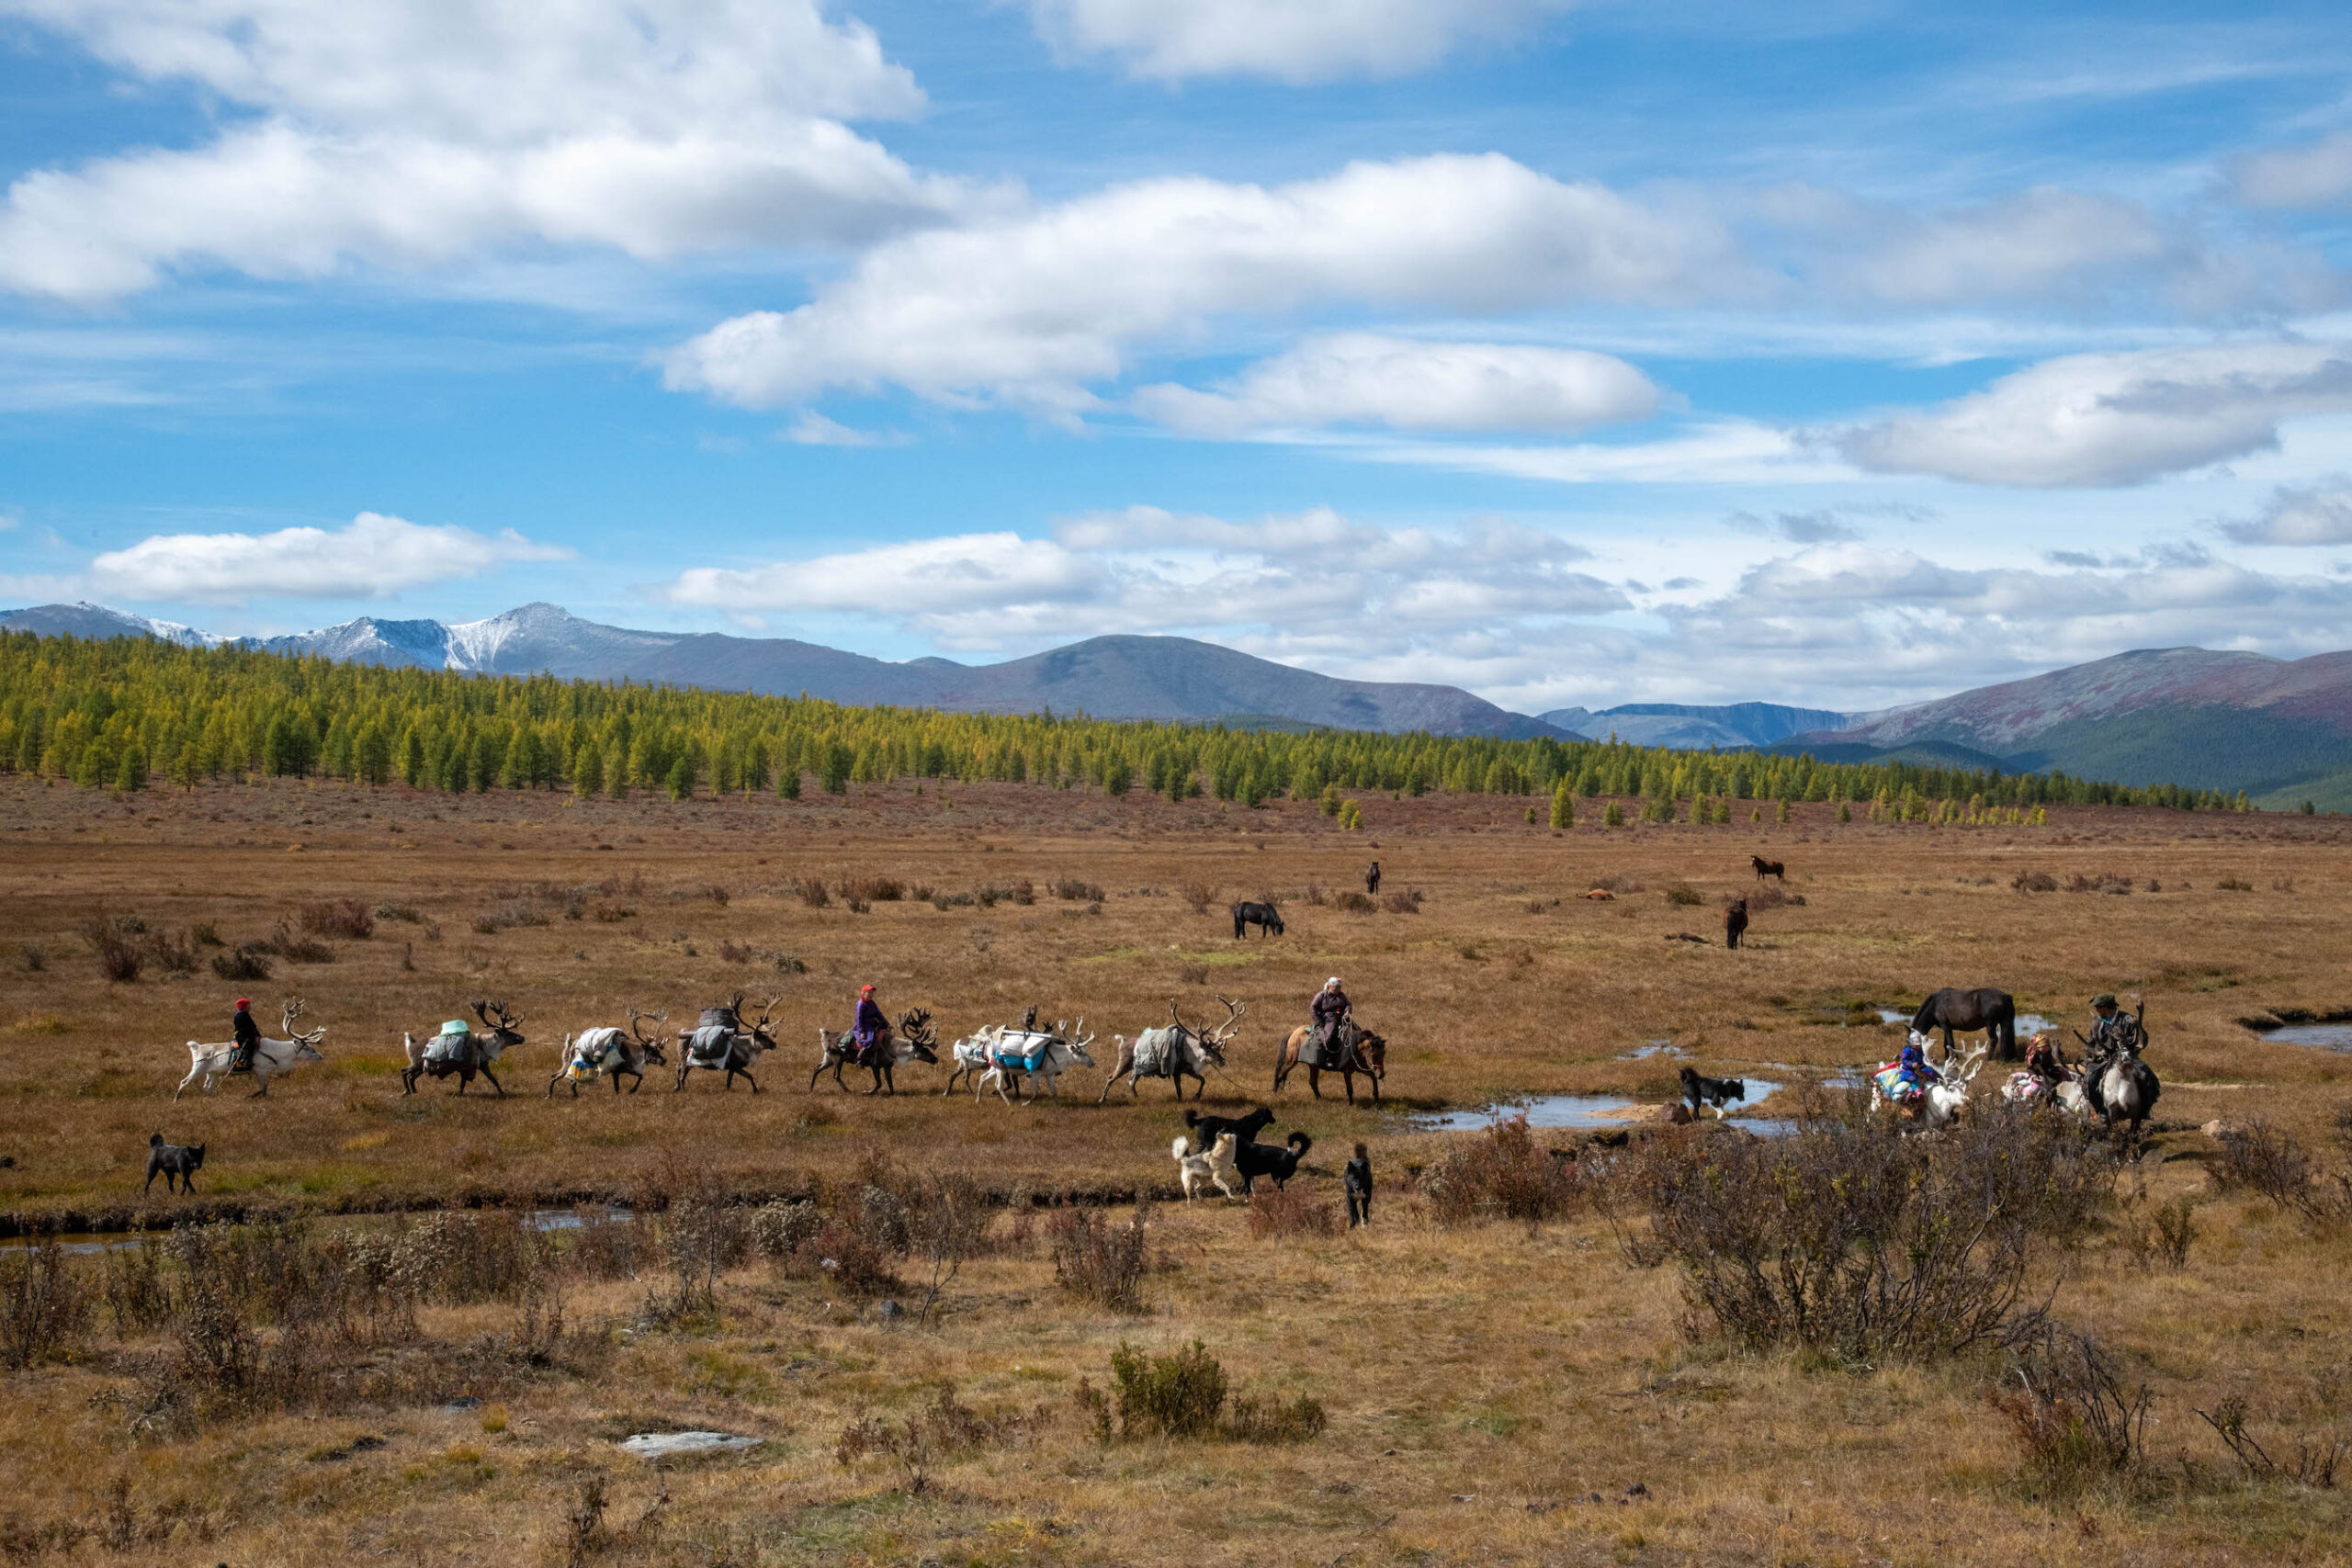 A small stream in a bog is crossed by a reindeer caravan. Trees and mountains rise in the background.